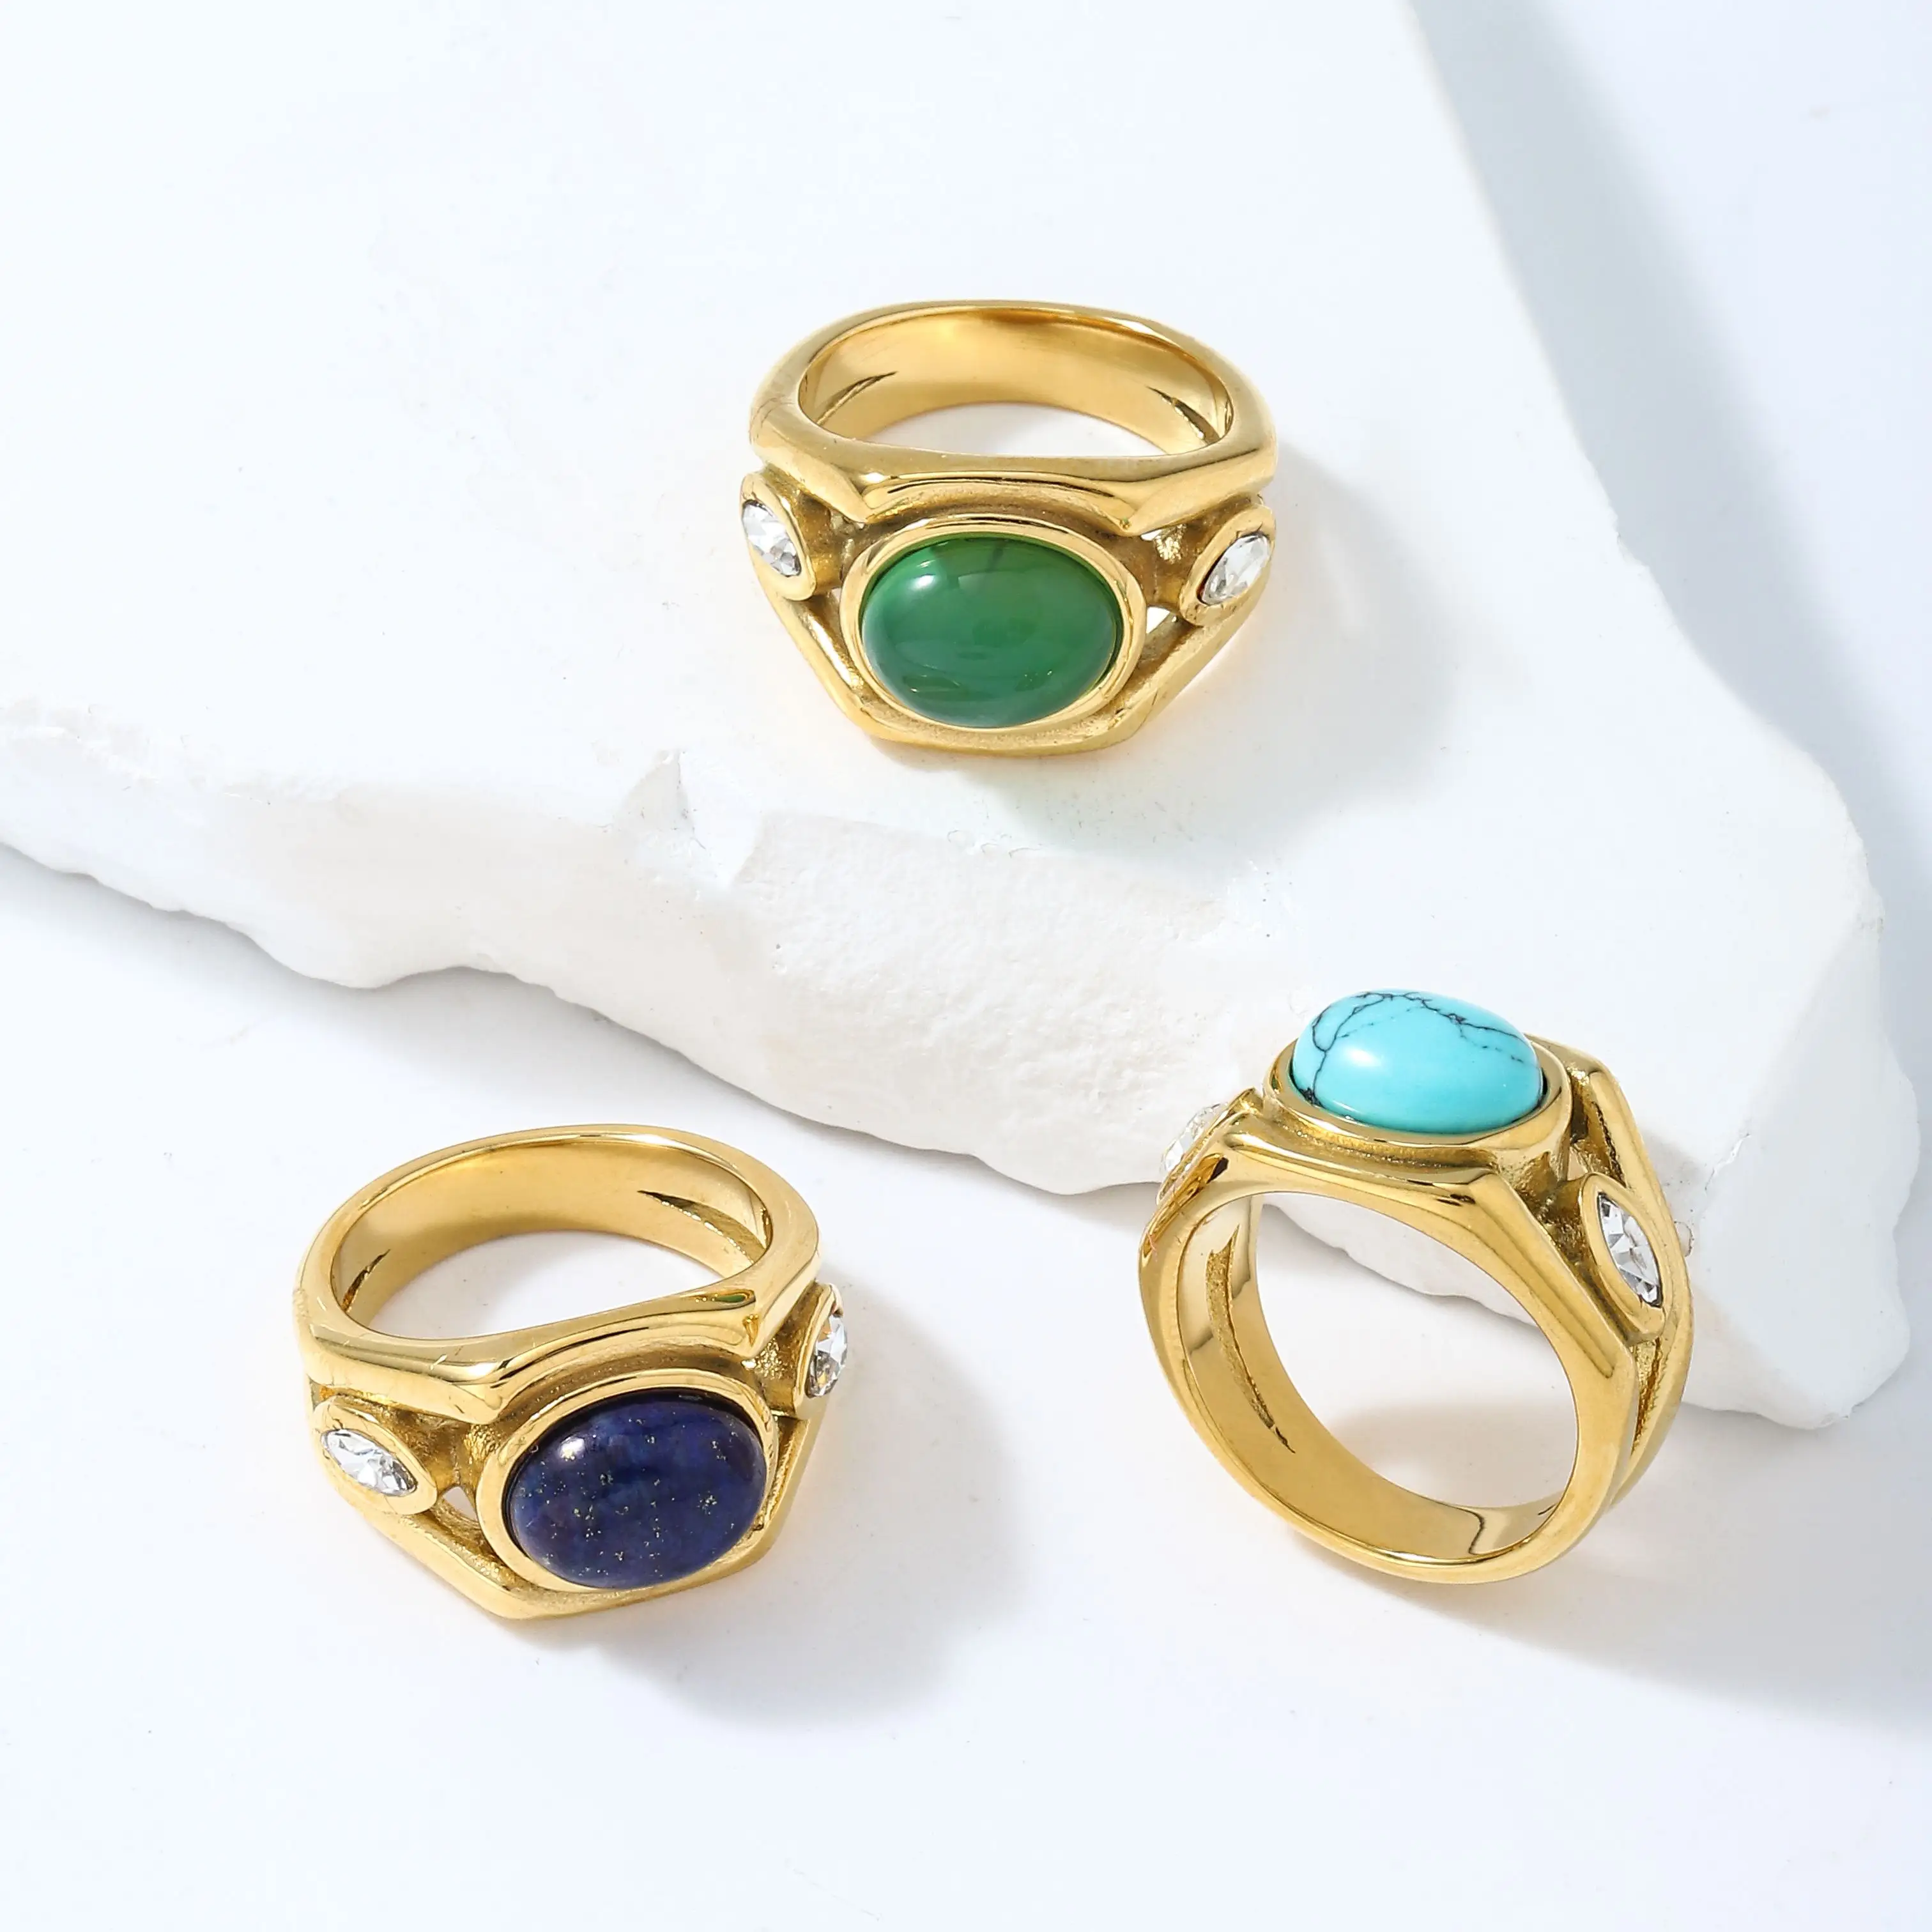 Ruigang Custom Chunky Turquoise Lapis Lazuli Cat Eyes Ring Waterproof Jewelry 18k Gold Plated Ring Stainless Steel Oval Rings